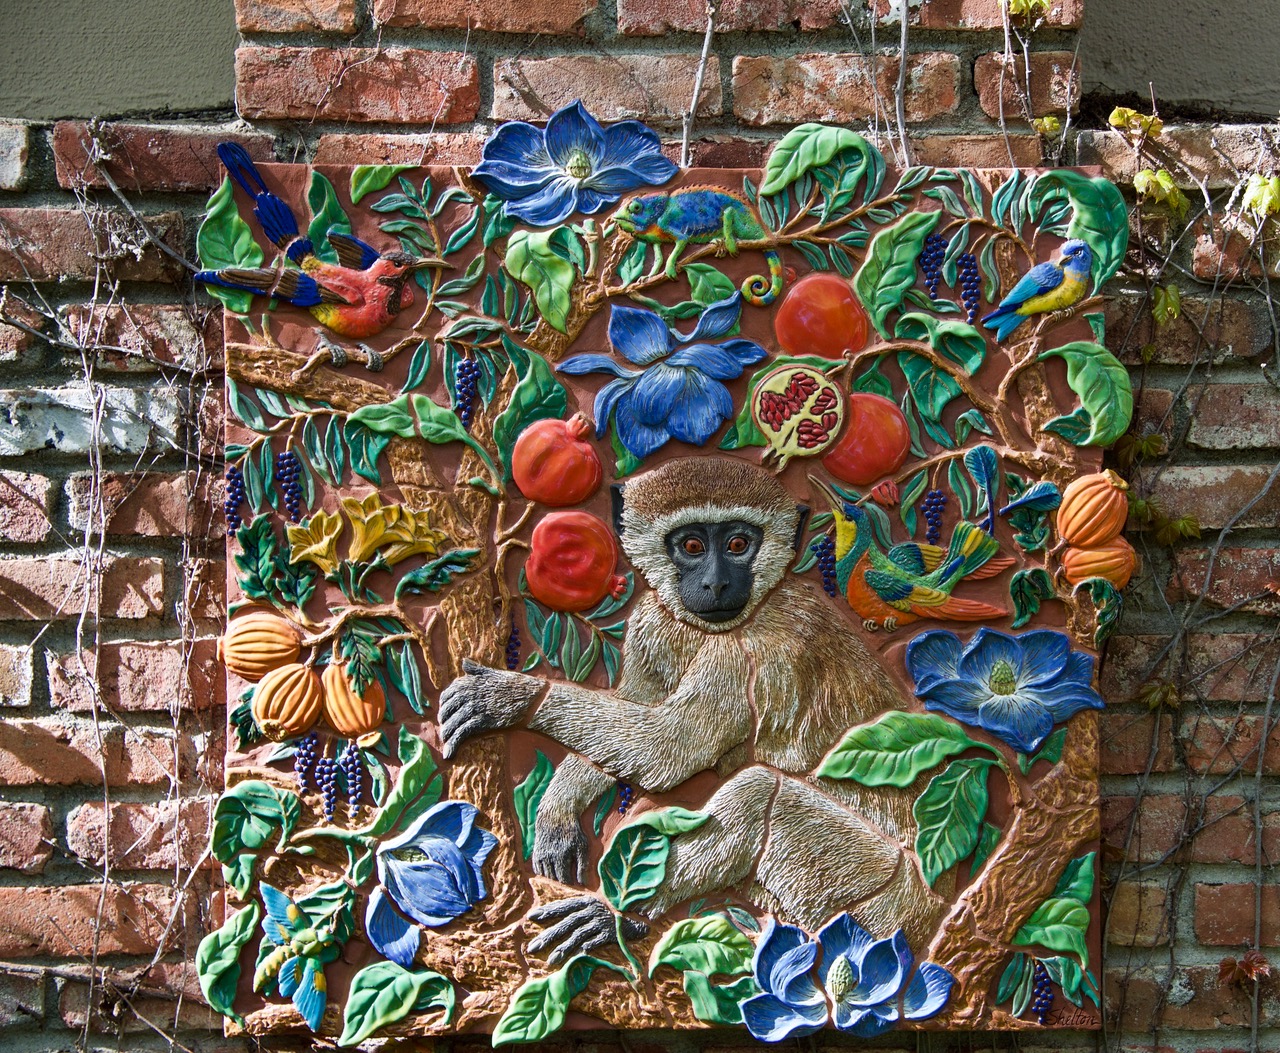 Carved Ceramic Garden Mural of Langur Monkey and Tropical Plants